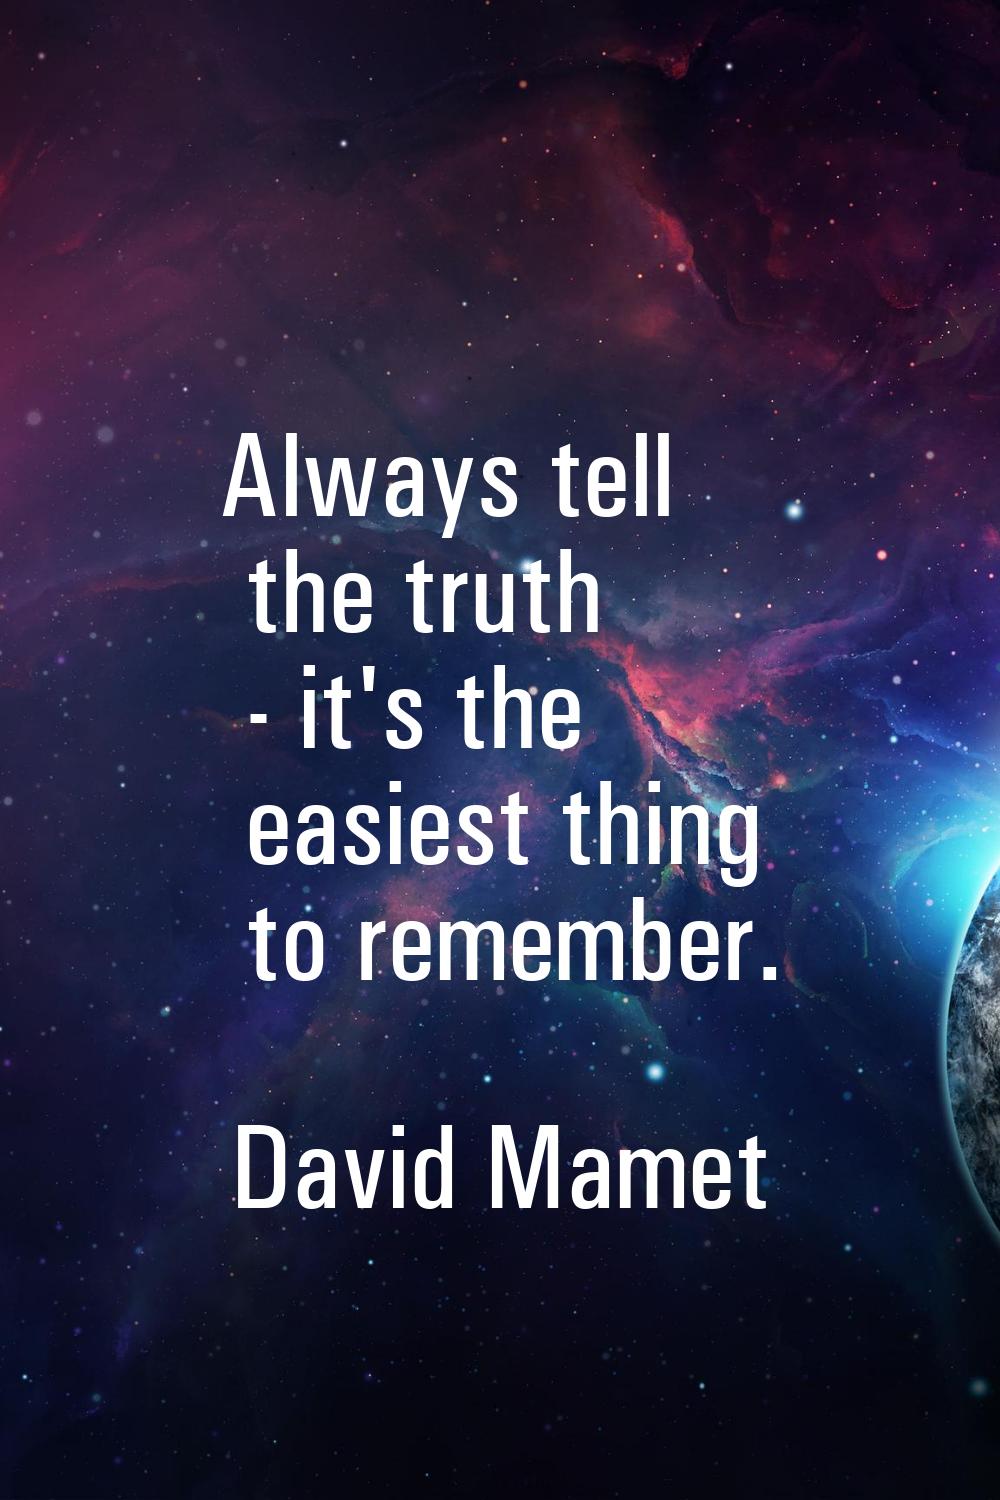 Always tell the truth - it's the easiest thing to remember.